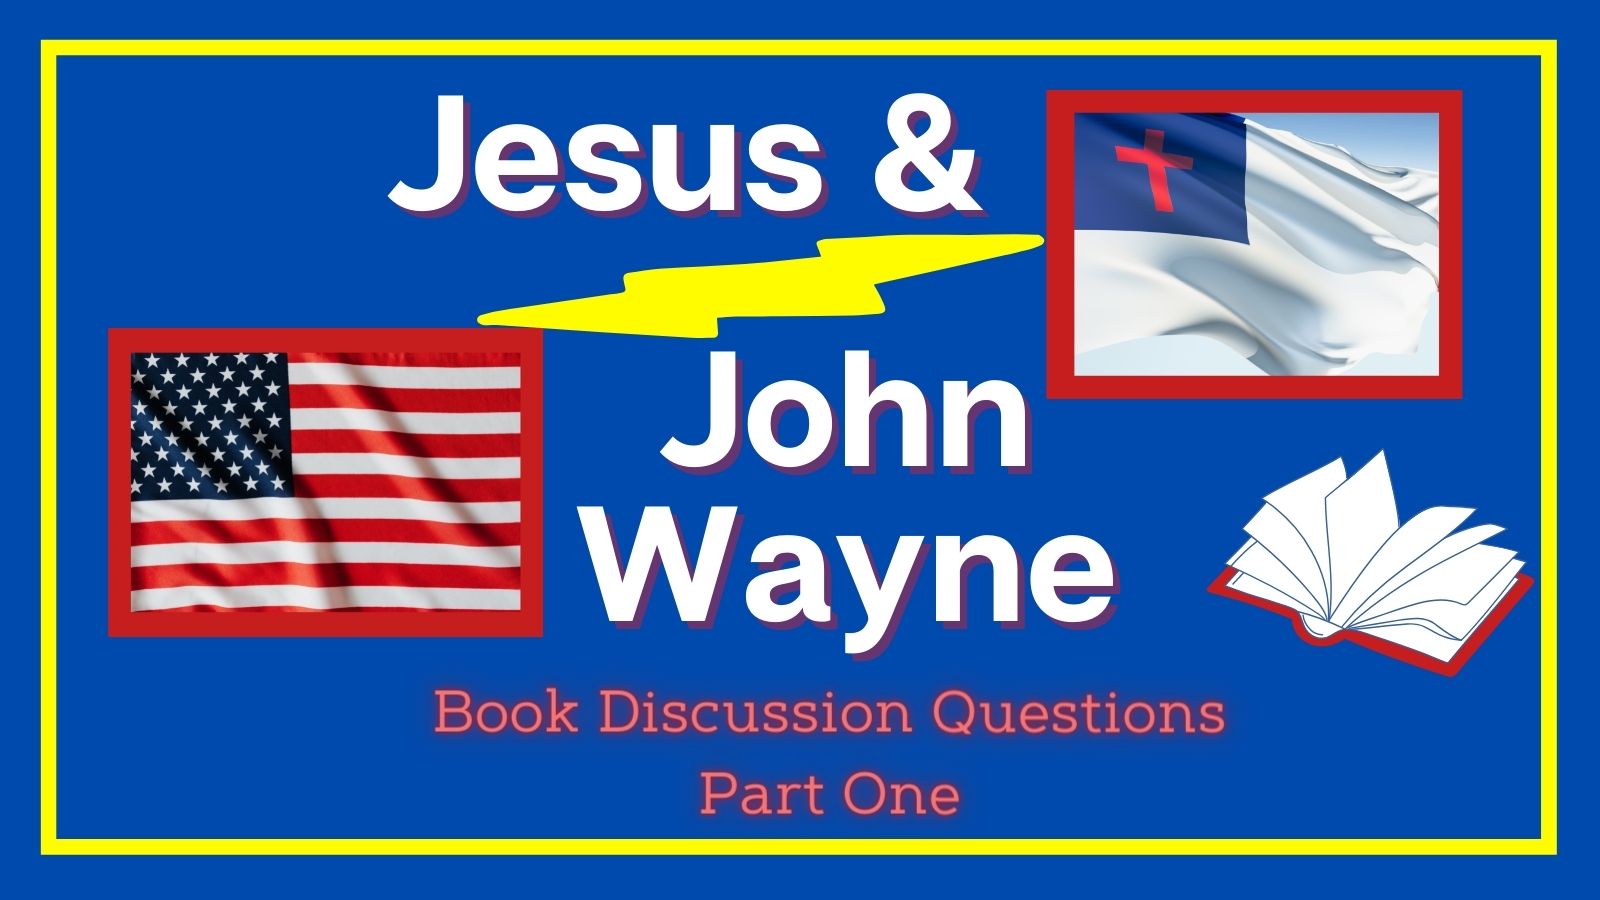 Jesus and John Wayne Book Discussion Questions